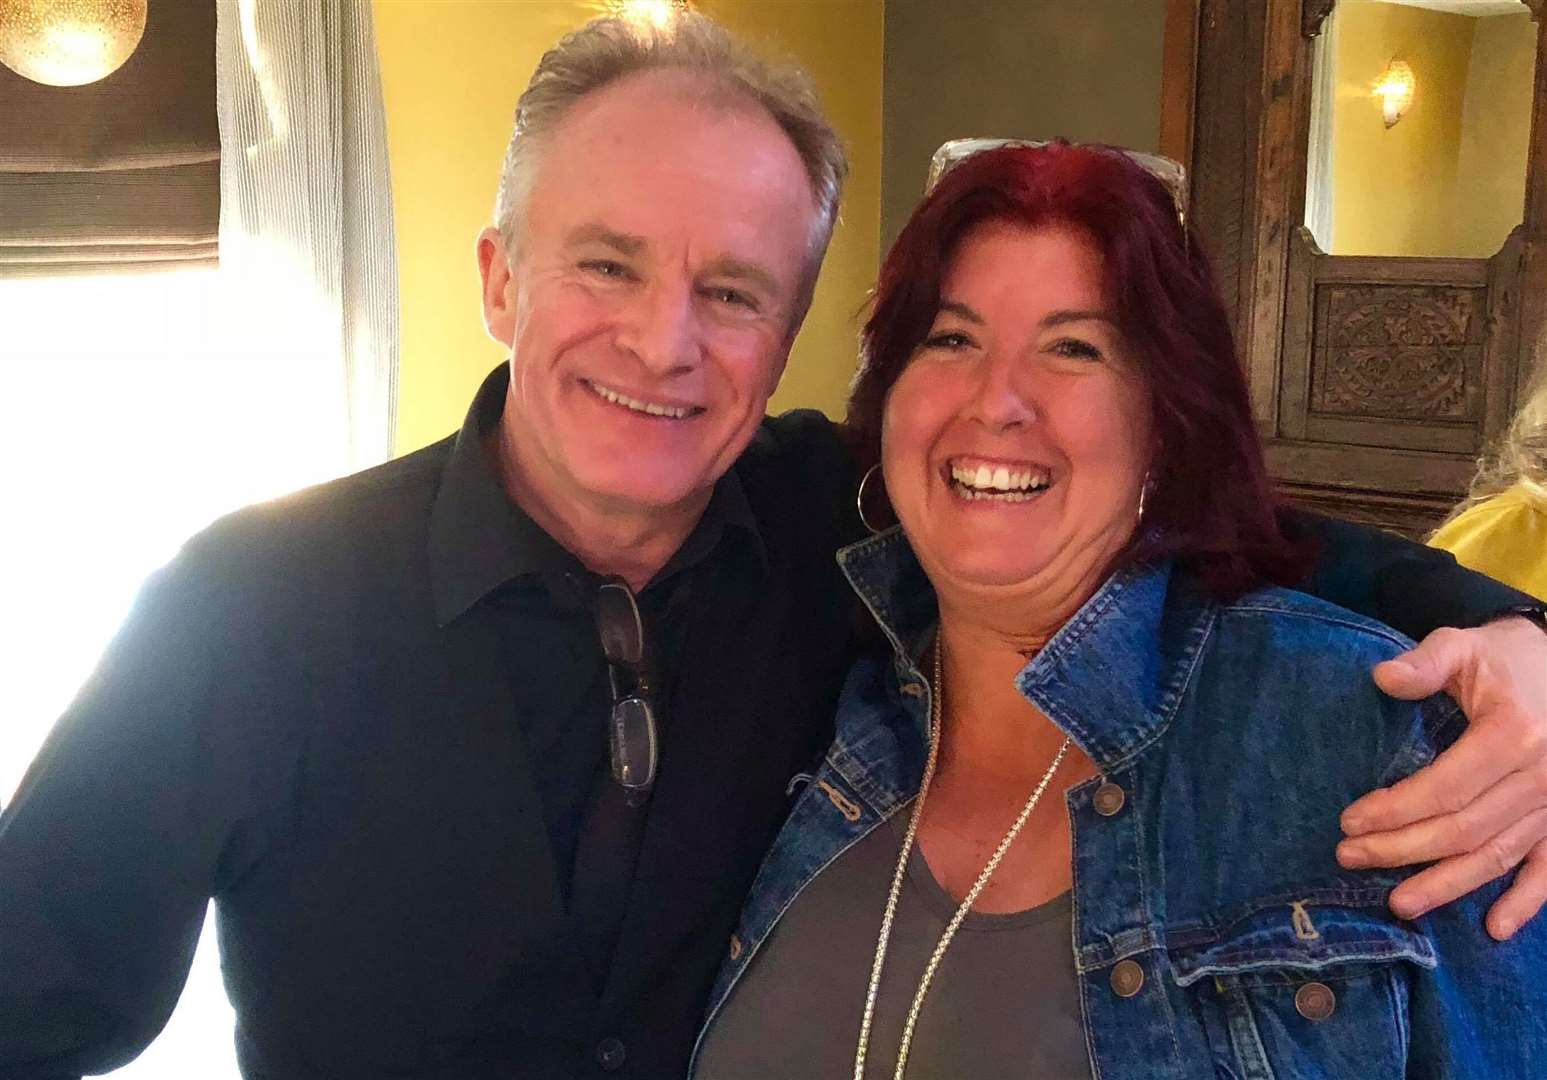 Sharon Jackson with comedian Bobby Davro runs Much Laughter